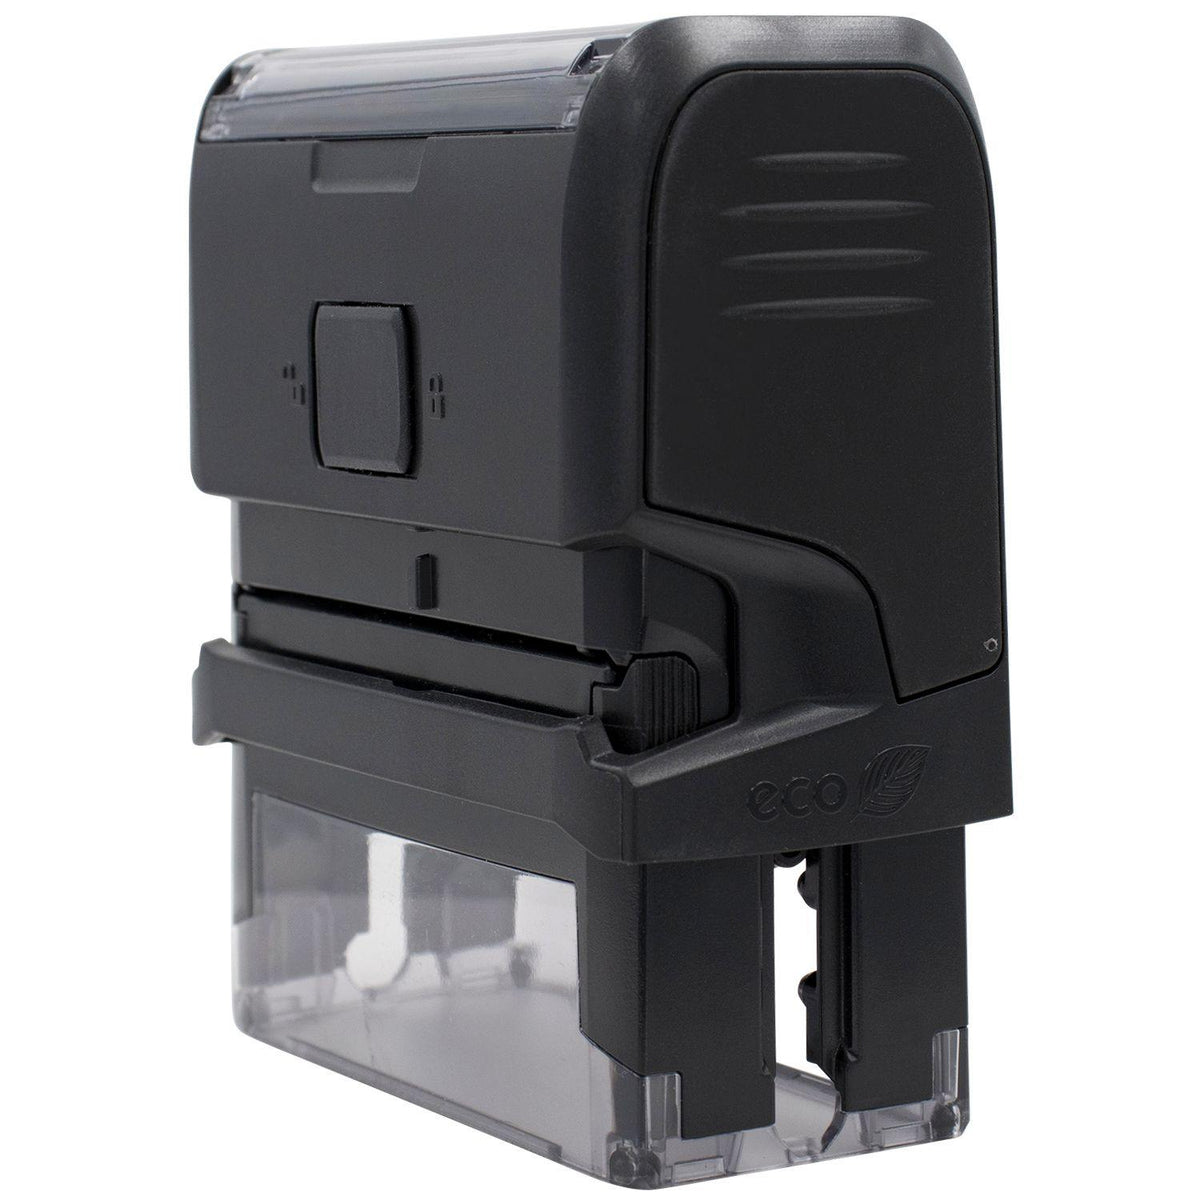 Side View of Large Self Inking Blue Ribbon Stamp at an Angle